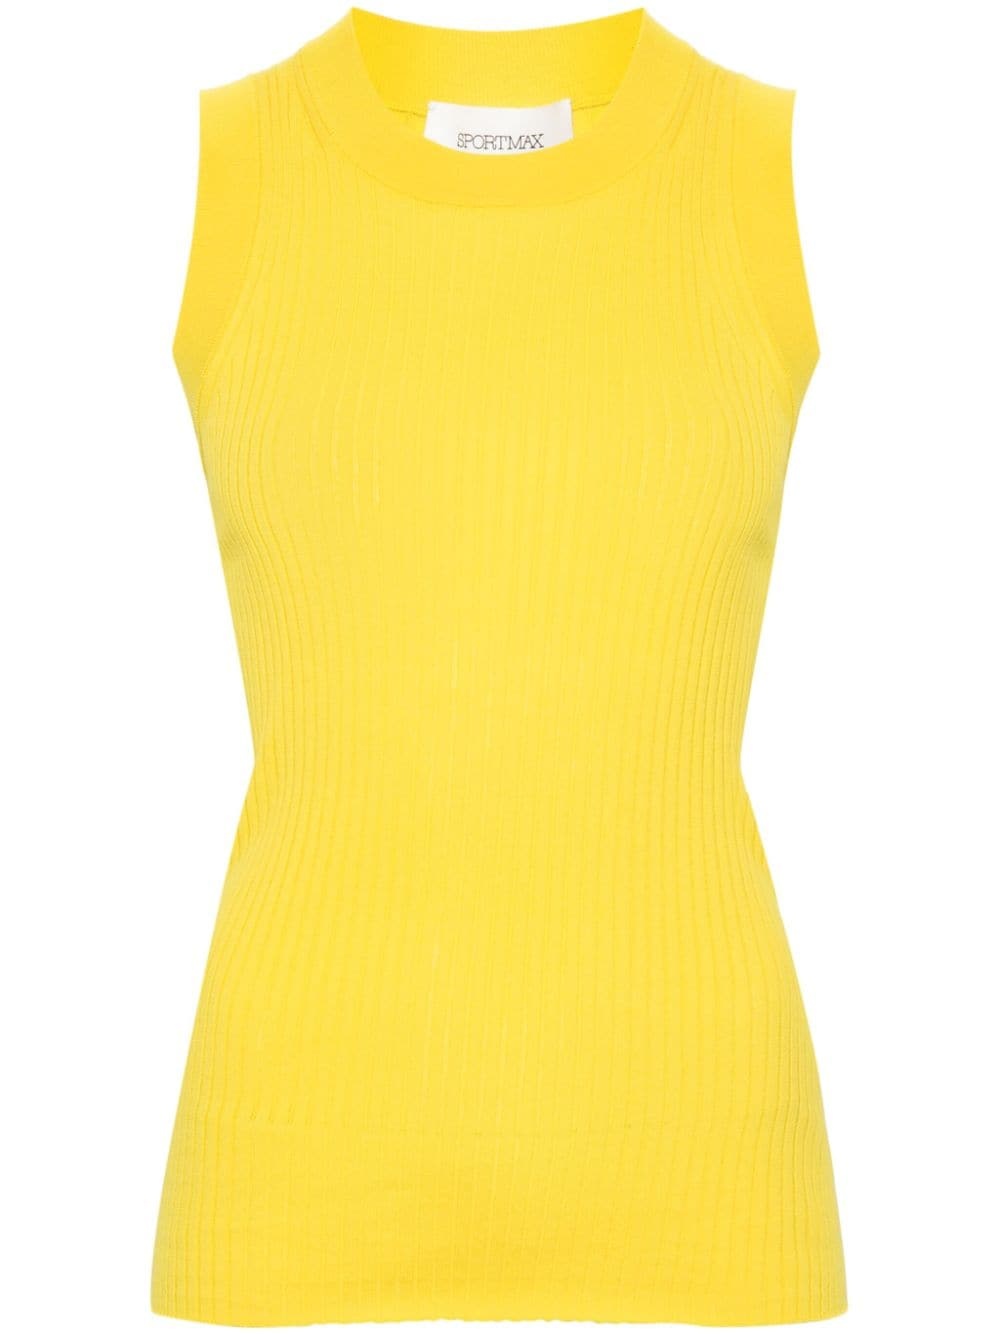 Toledo knitted tank top - 1